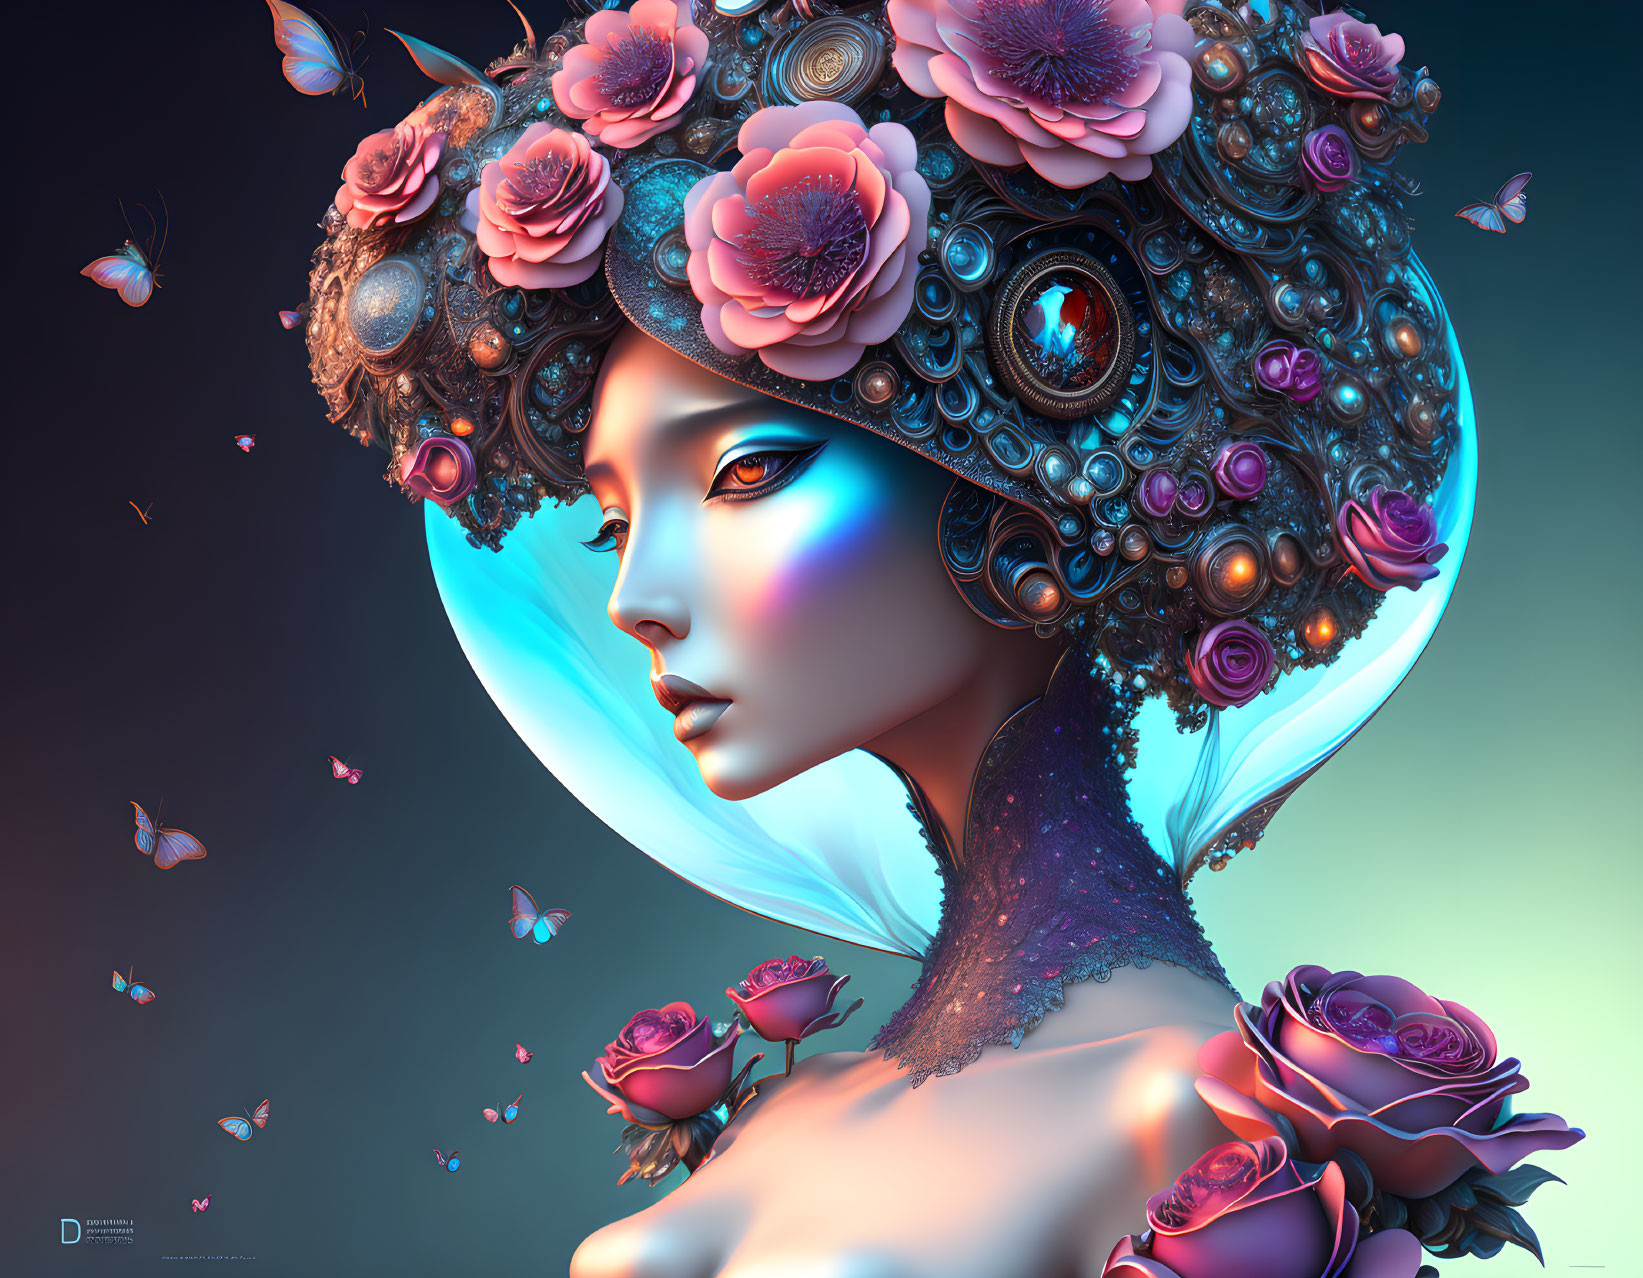 Digital artwork: Woman with decorative headpiece of flowers, butterflies, and mechanical elements on lunar backdrop